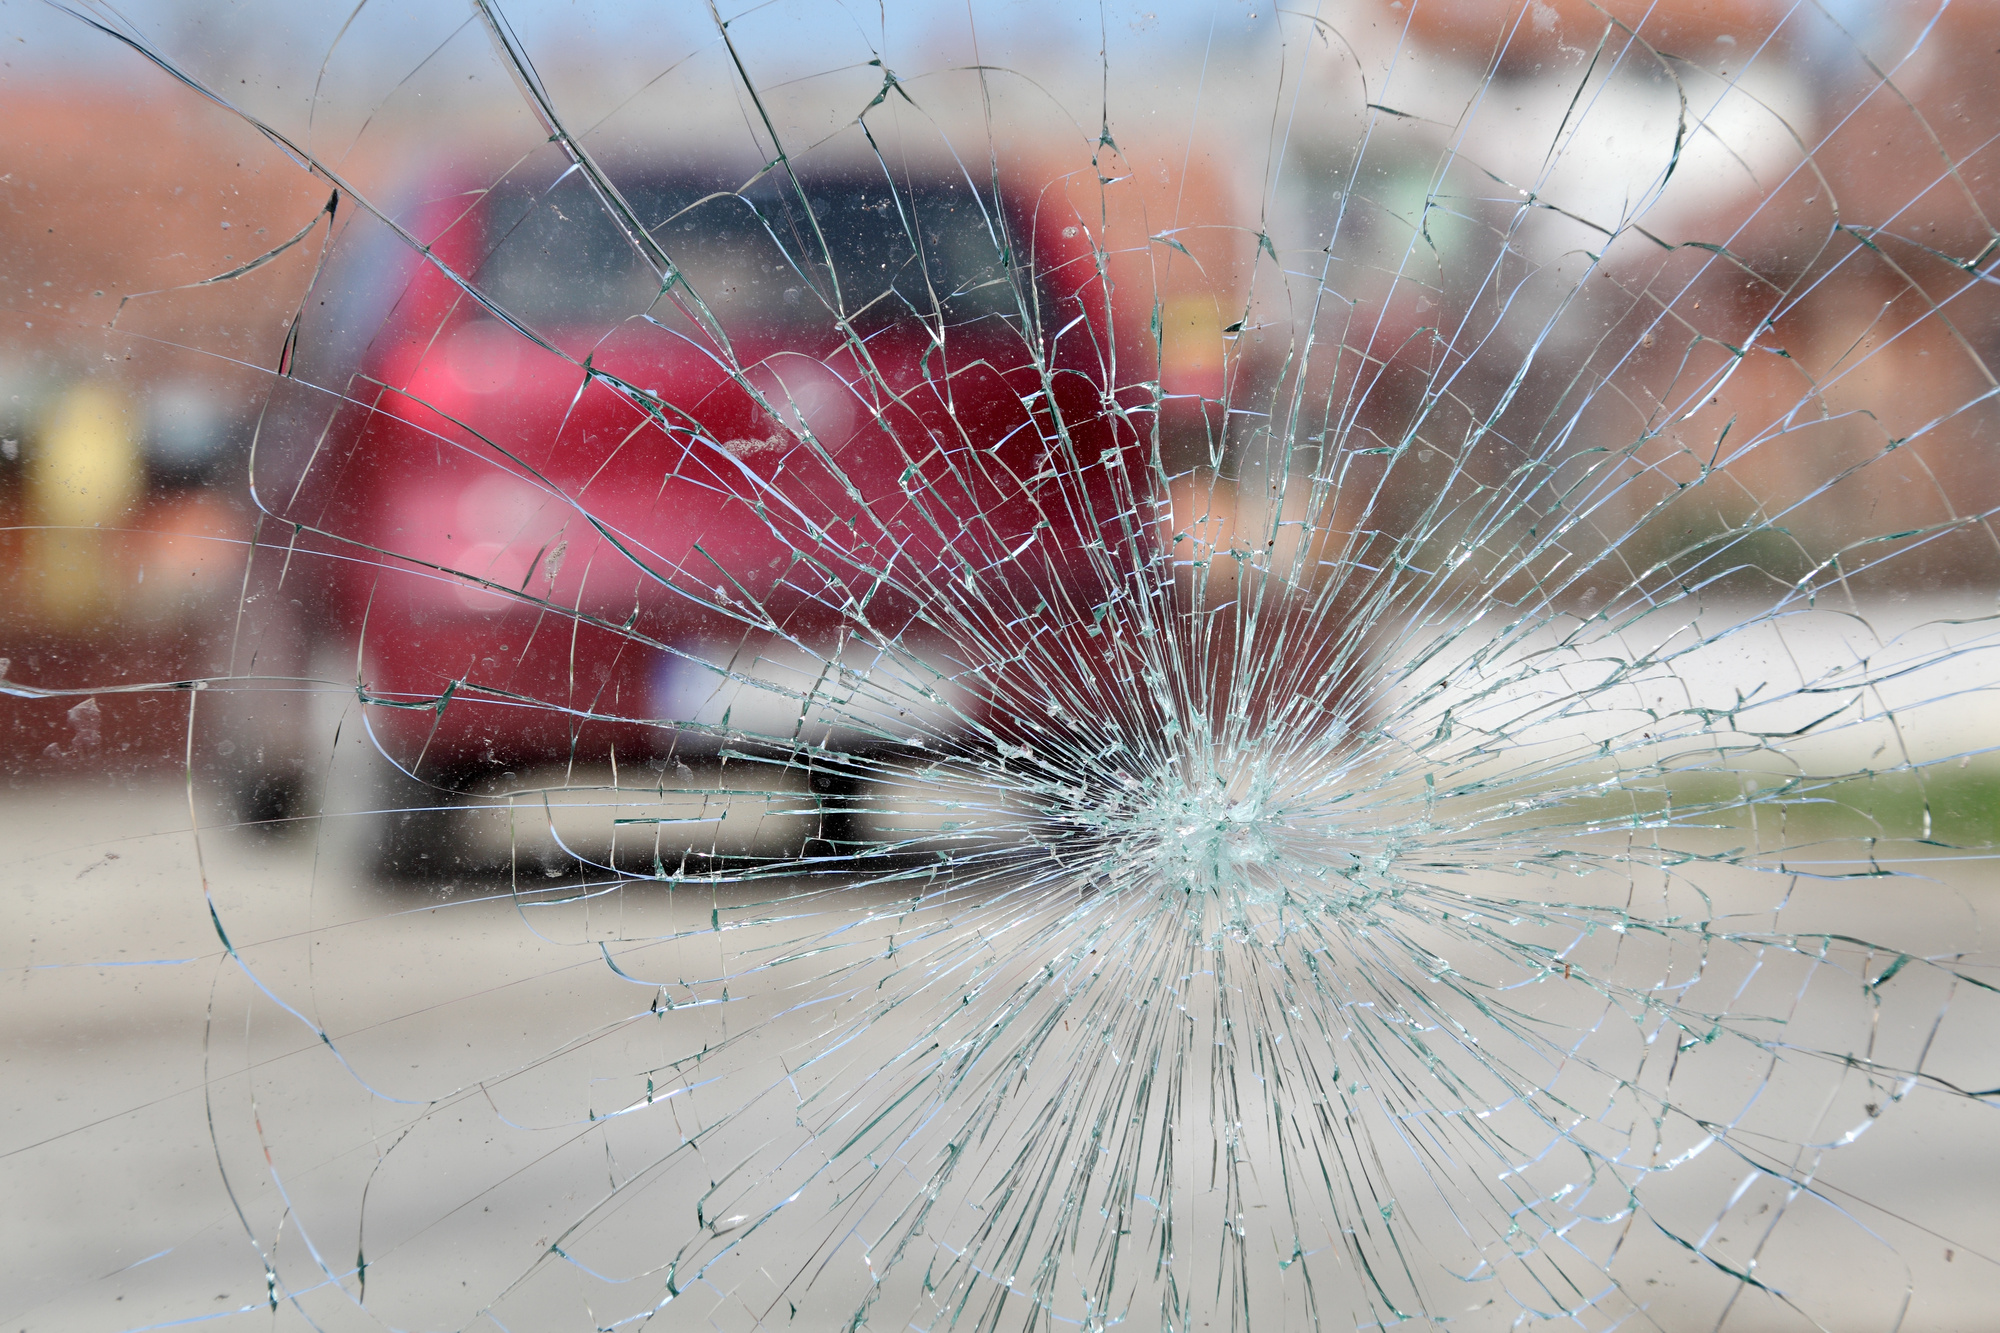 Don’t Risk It: The Dangers of Driving with a Cracked Windshield